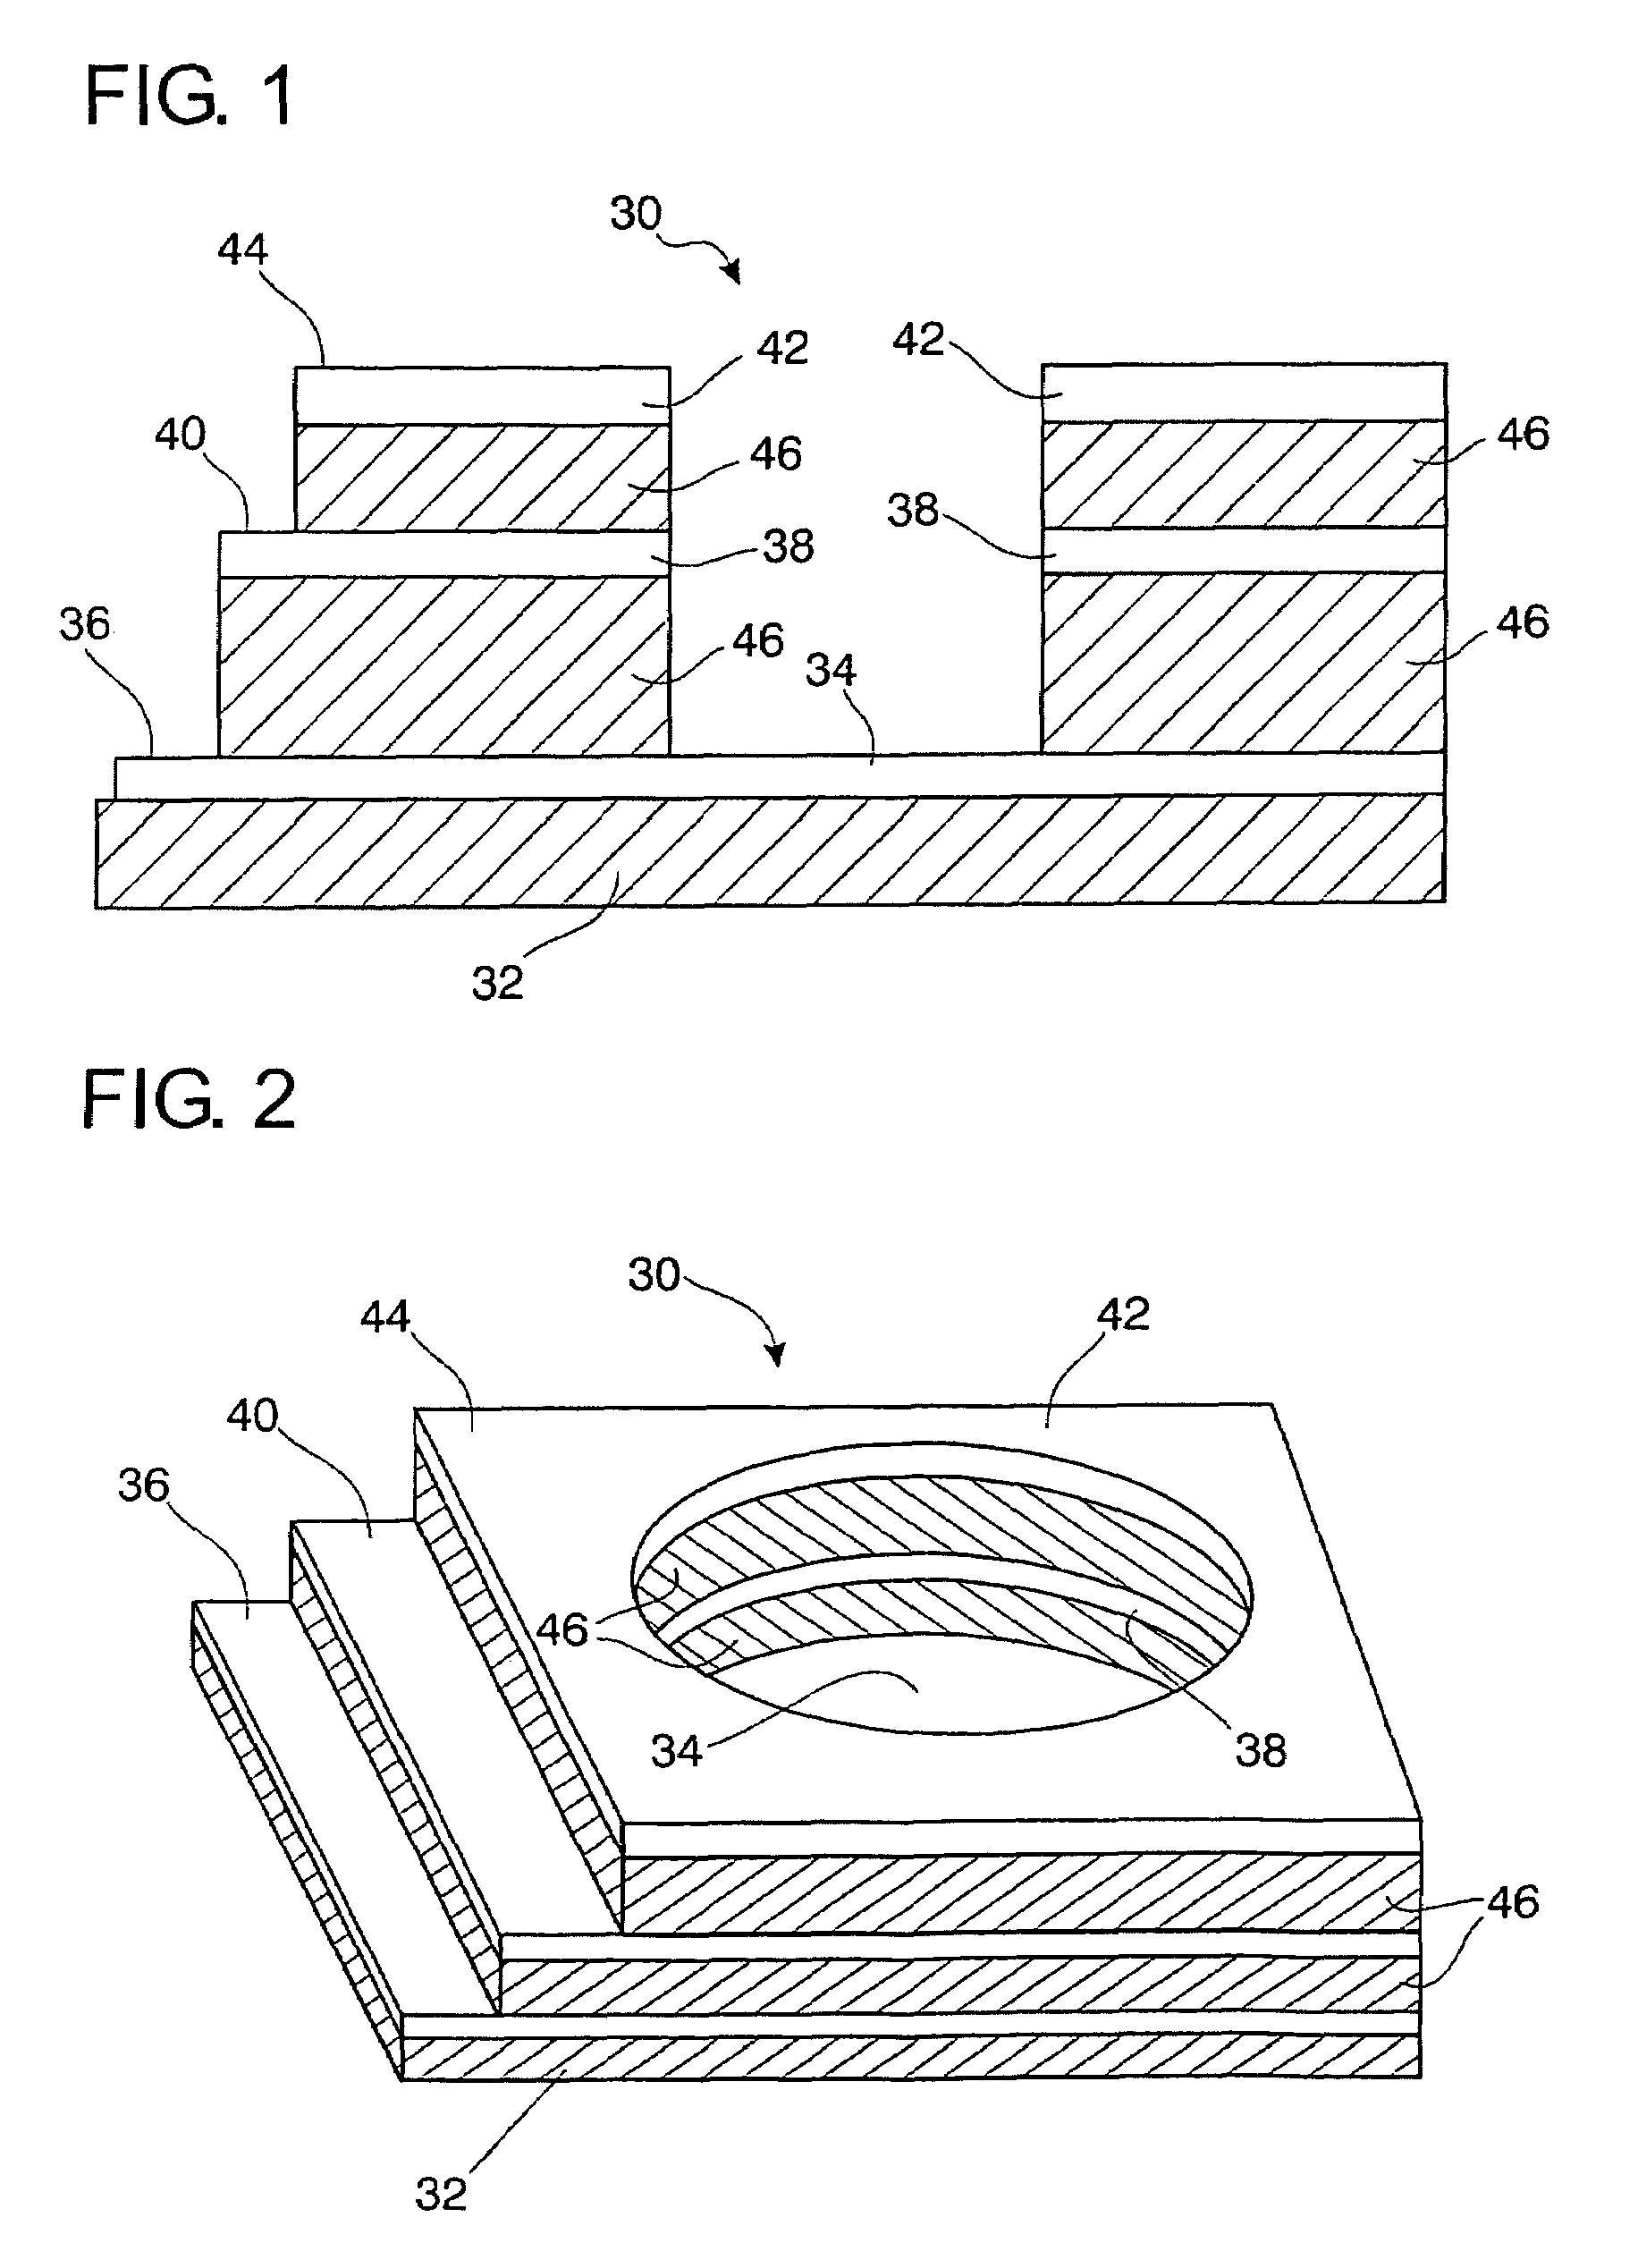 Self-contained microelectrochemical bioassay platforms and methods